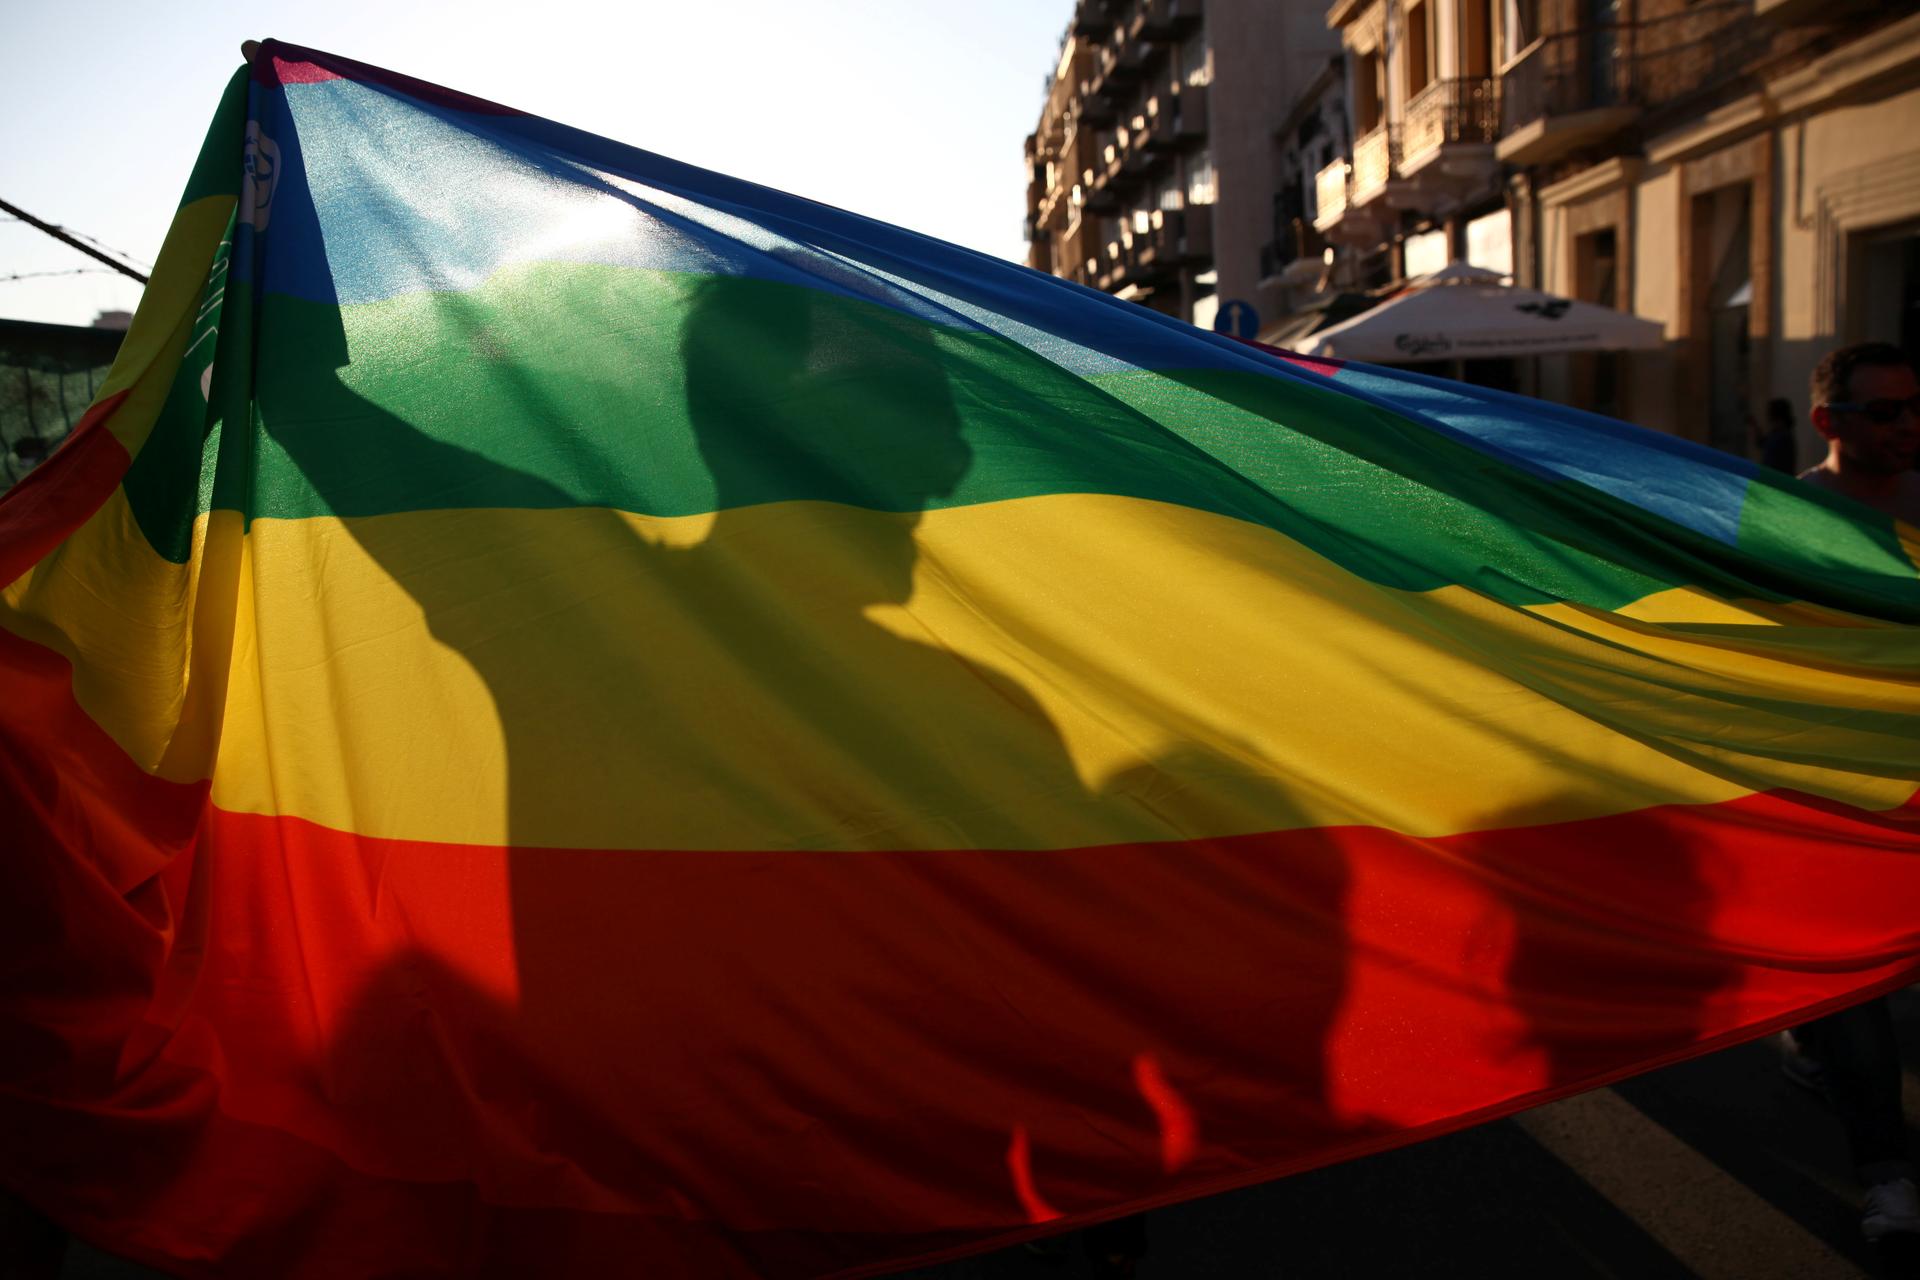 Participants are silhouetted while holding a rainbow flag during the annual gay pride parade in central Nicosia, Cyprus May 29, 2016.